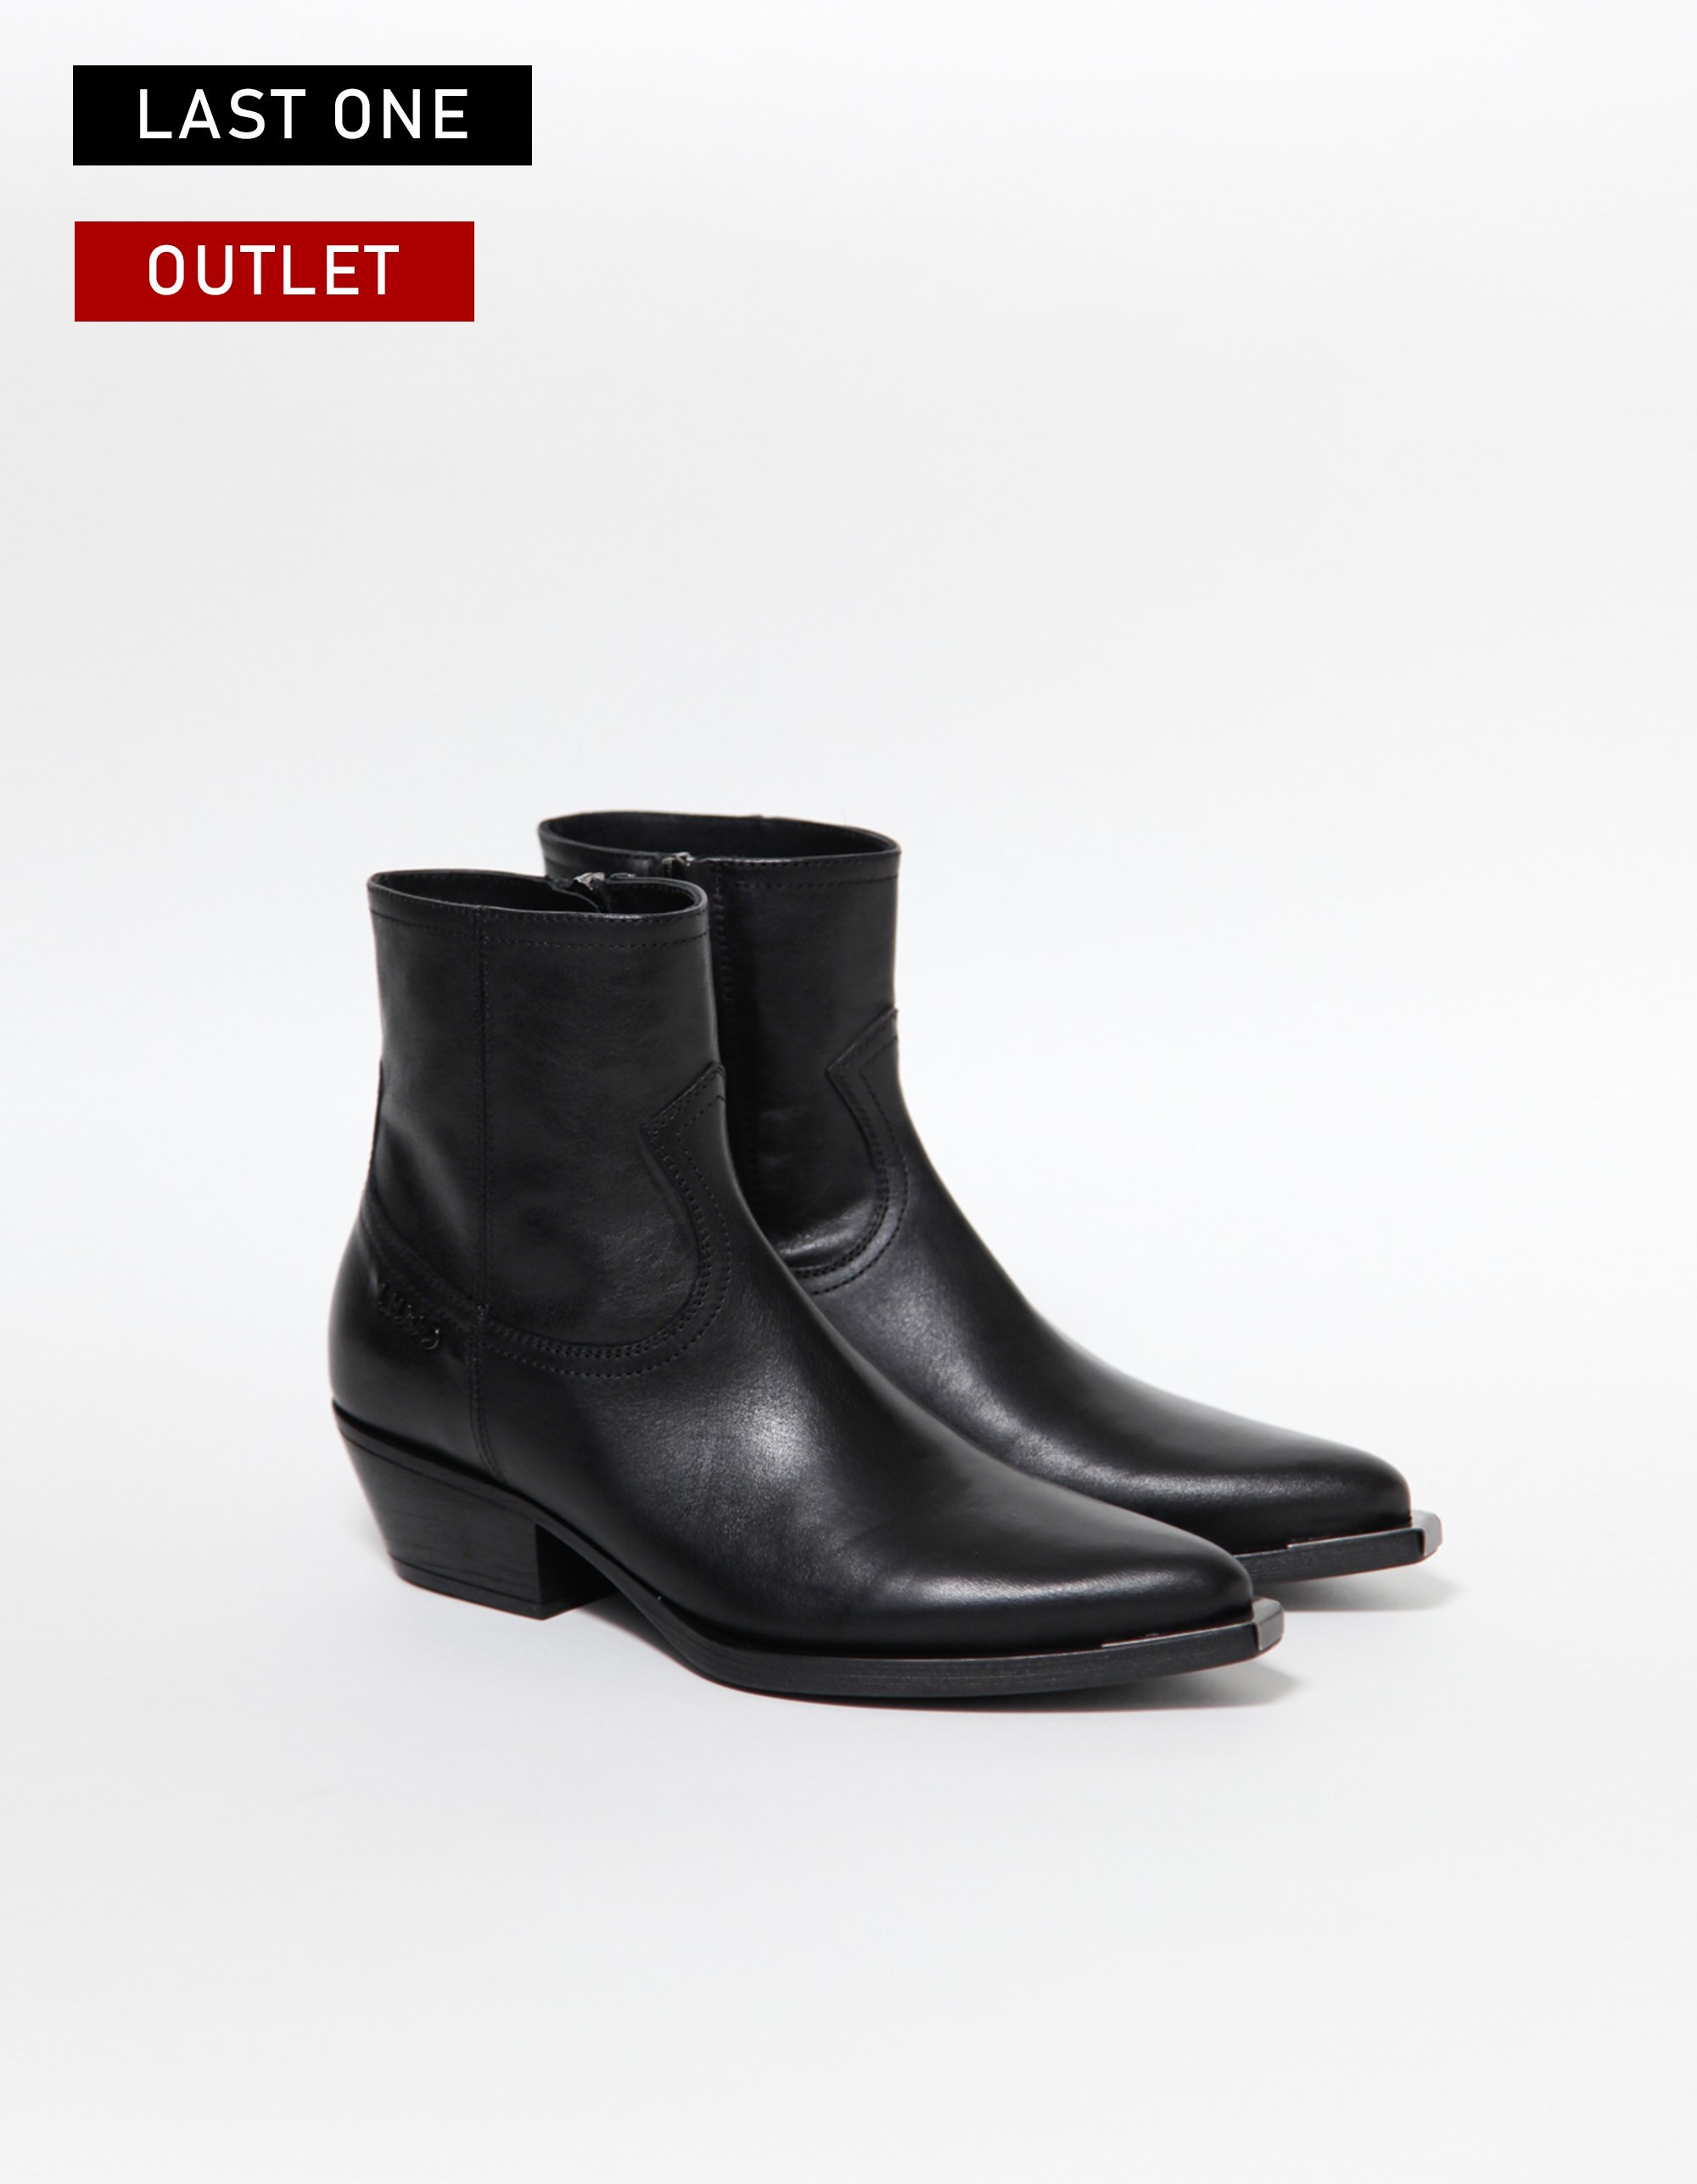 LIUJOGenuine leather Texan ankle boots